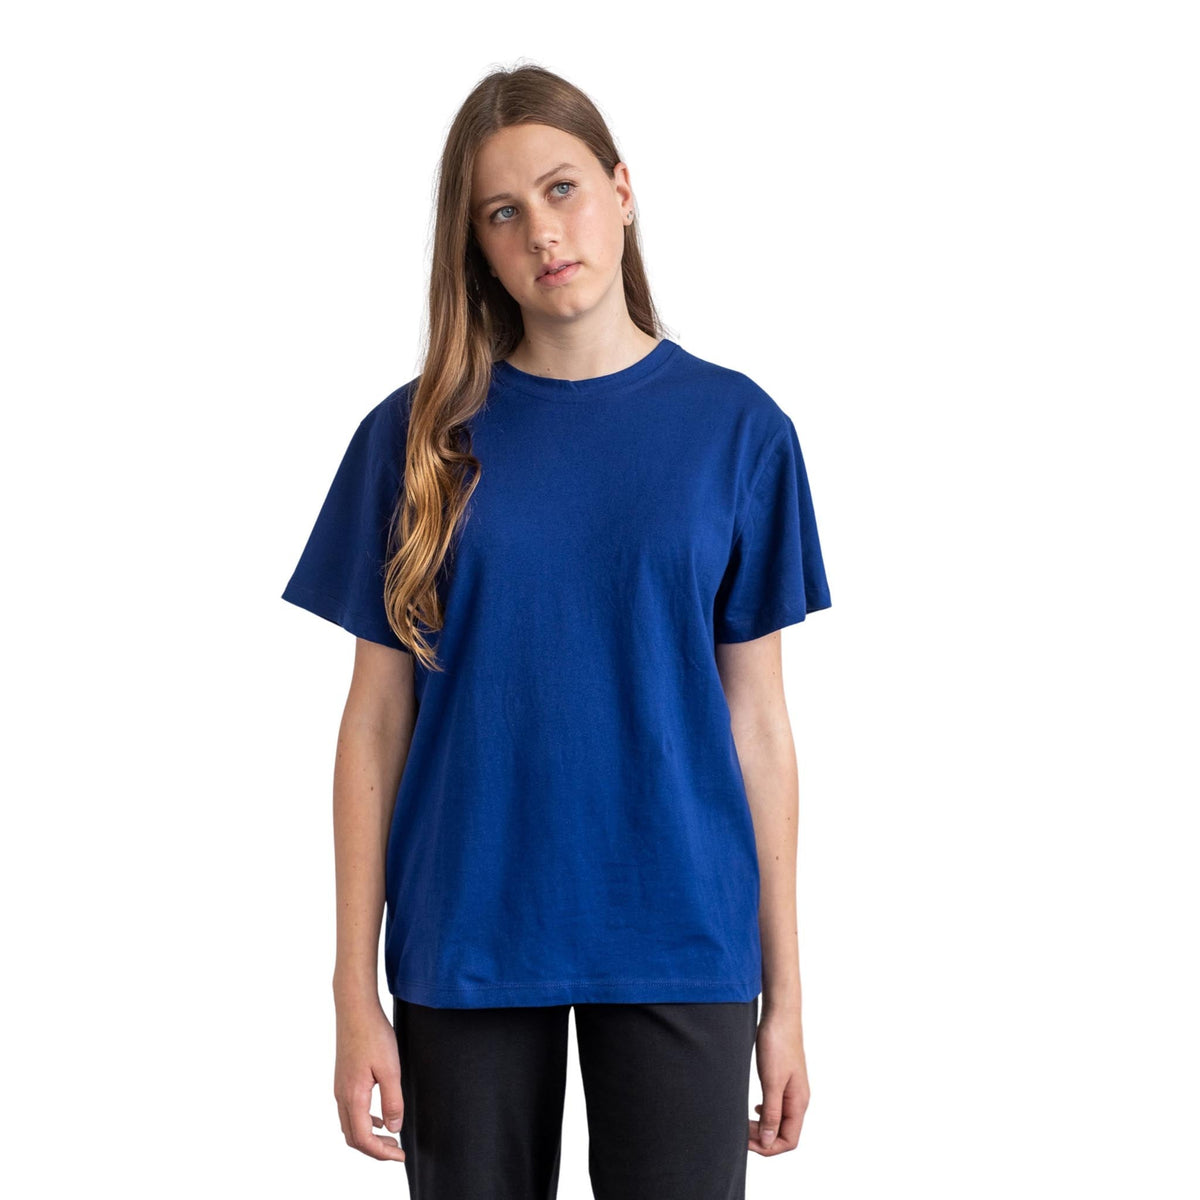 The Comfy T-Shirt-Teens. No tags, no lables. The Shapes United.